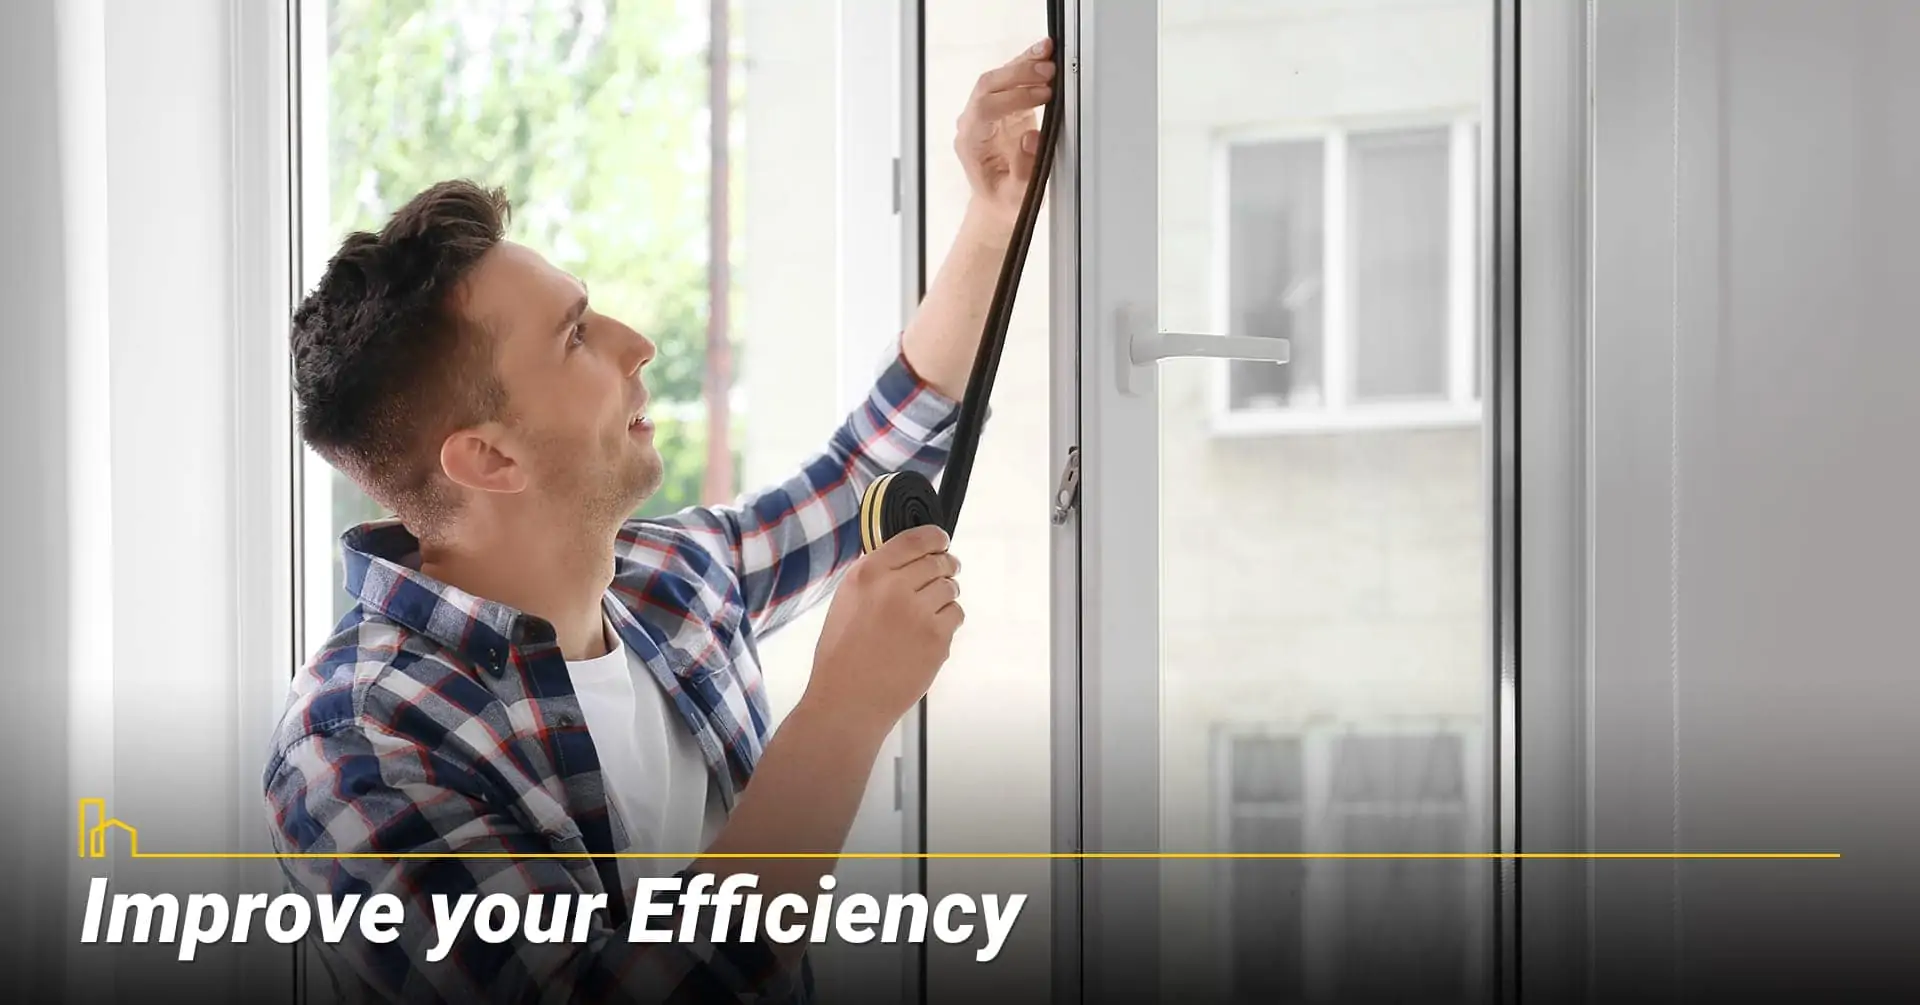 Improve your Efficiency, prevent drafts from windows